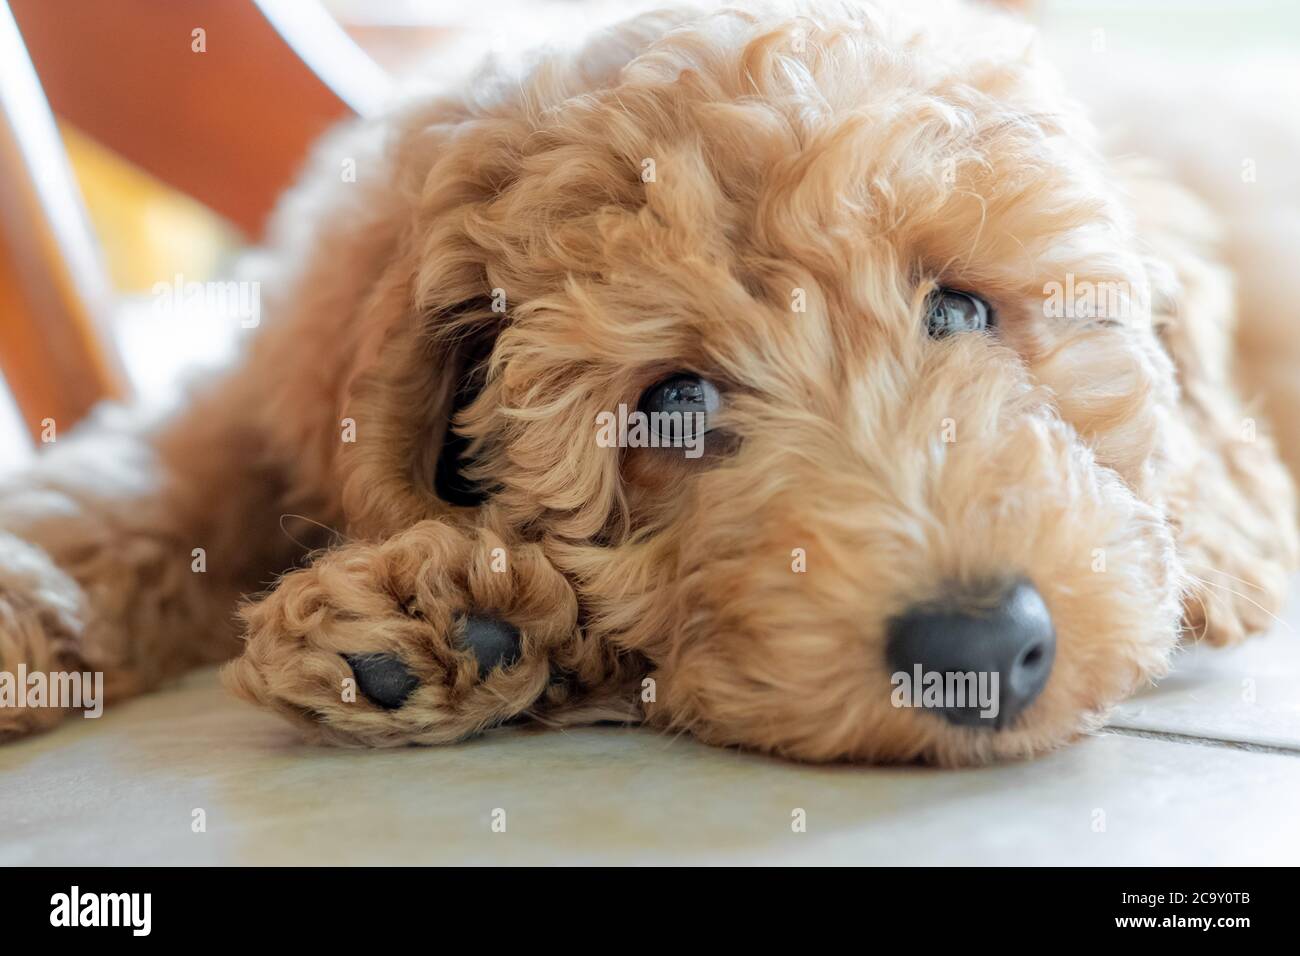 Shallow focus on the eyes of a beautiful pedigree miniature poodle puppy. Seen sulking under a kitchen table on the cool floor tiles. Stock Photo